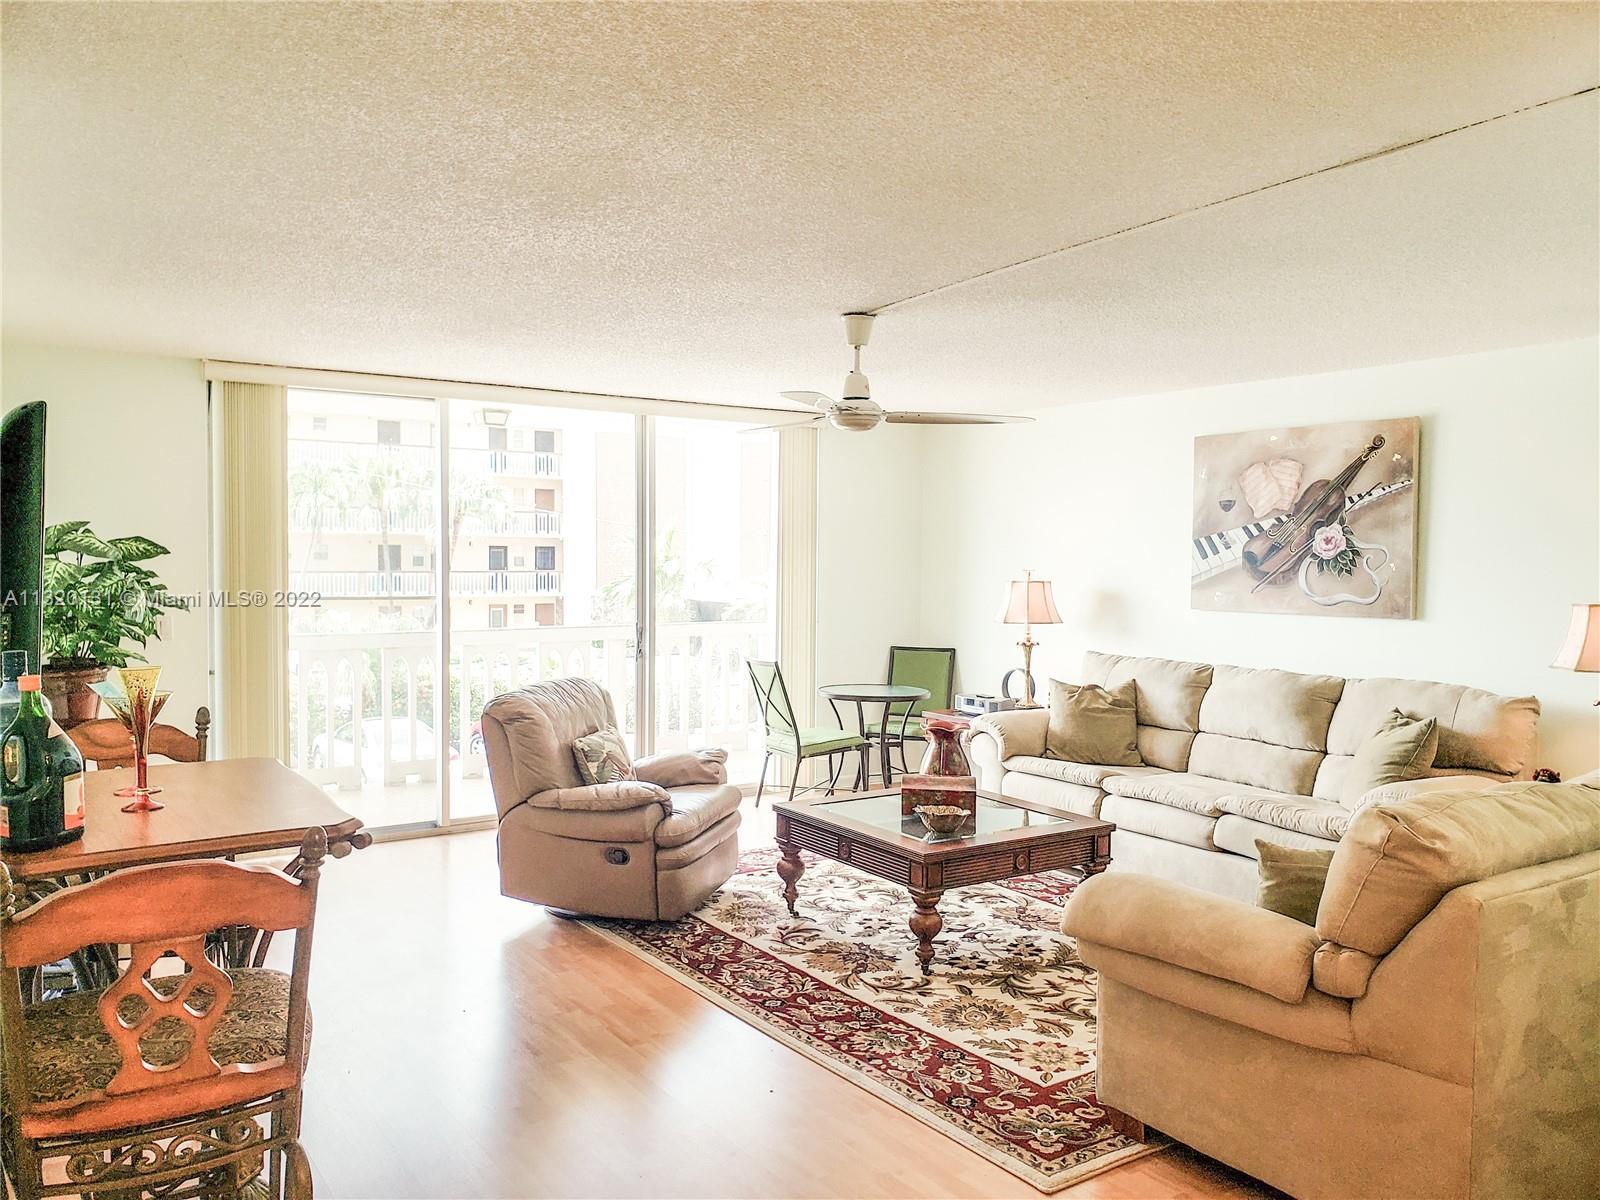 Beautiful apartment in the center of Hallandale Beach. Great location close to shopping centers and 